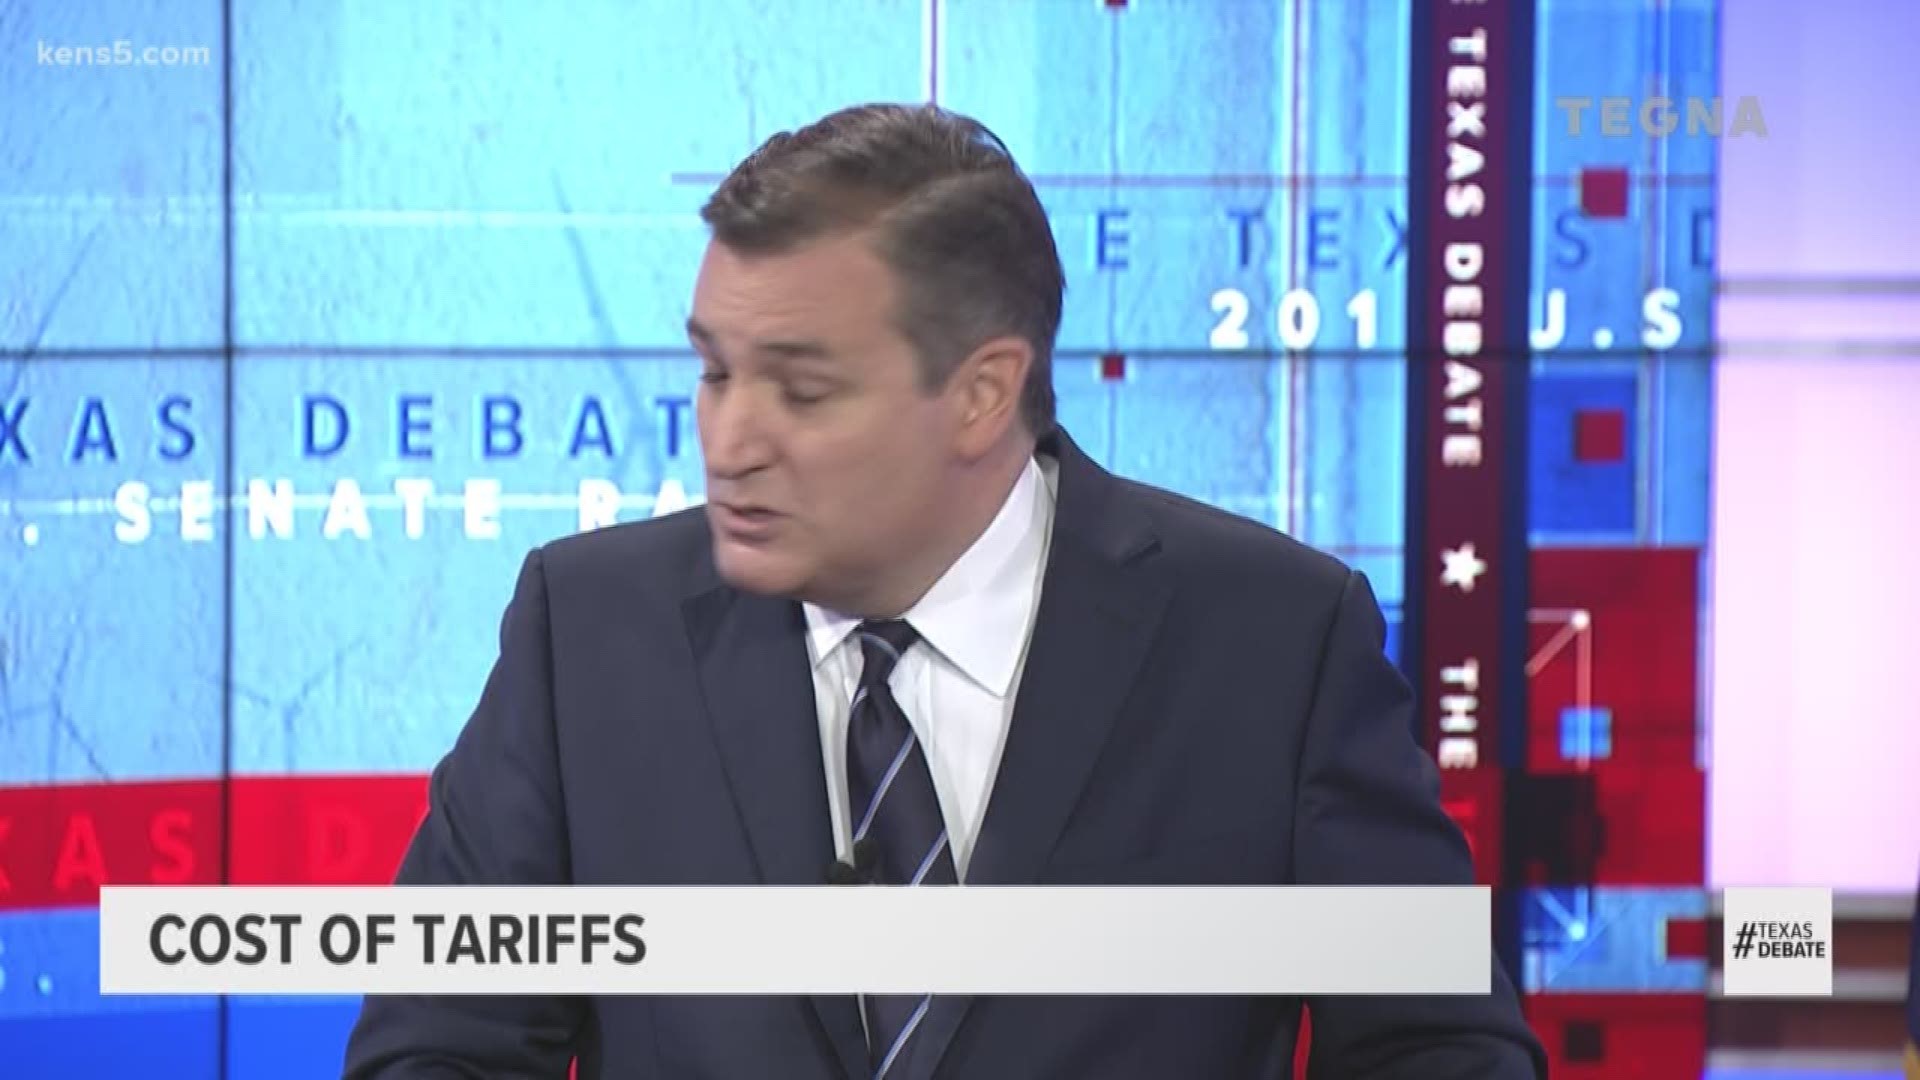 In response to a question on tariffs, Cruz said that O'Rourke would spend his years in a "partisan circus" shutting down the government. O'Rourke found the choice of words funny.